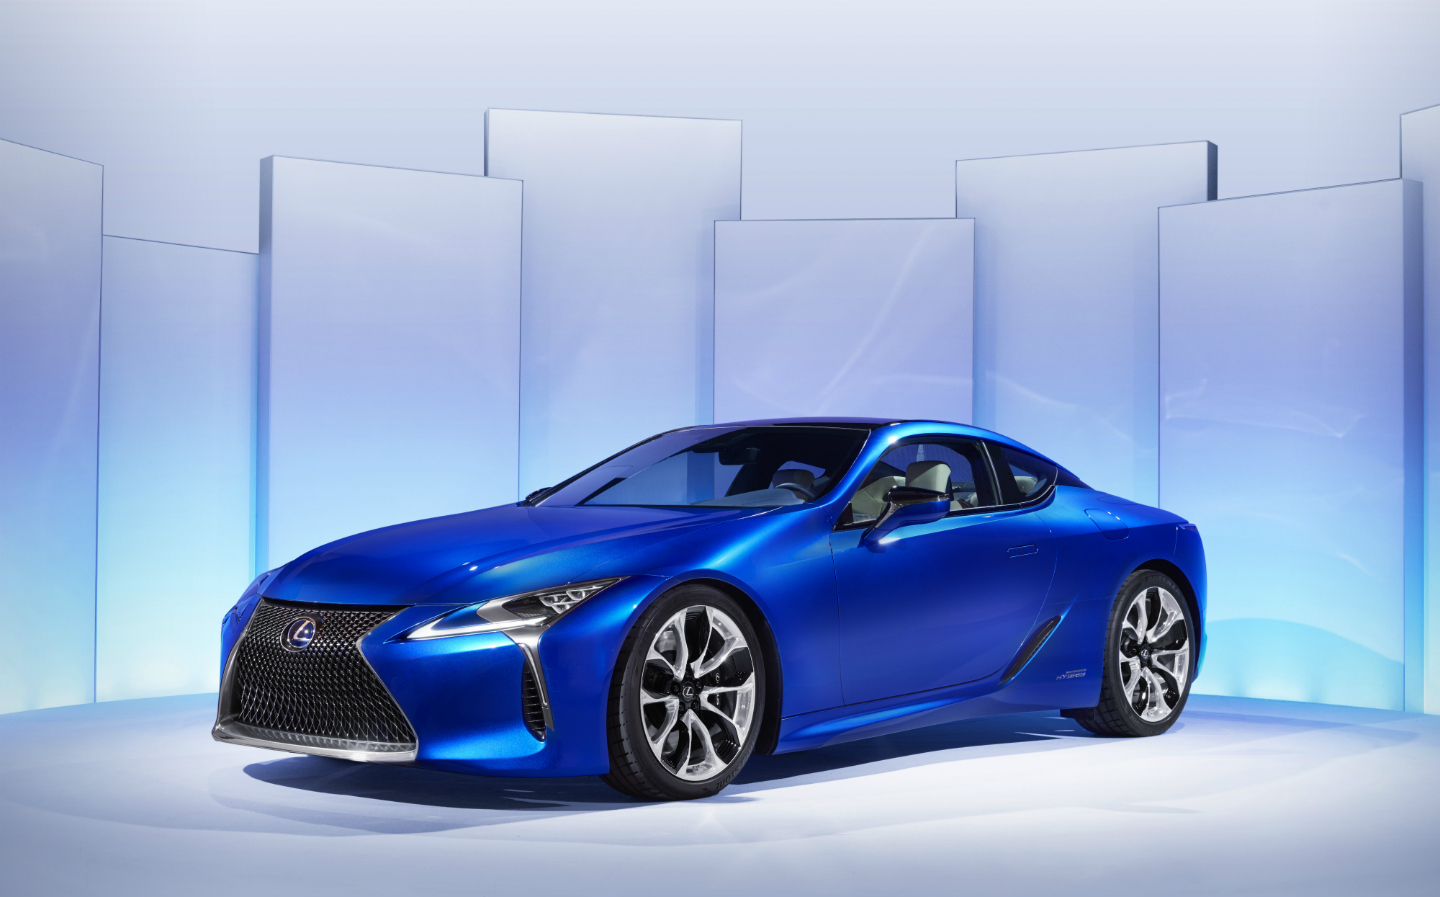 The best eco-friendly hybrid luxury and sports cars: 2018 Lexus LC500h